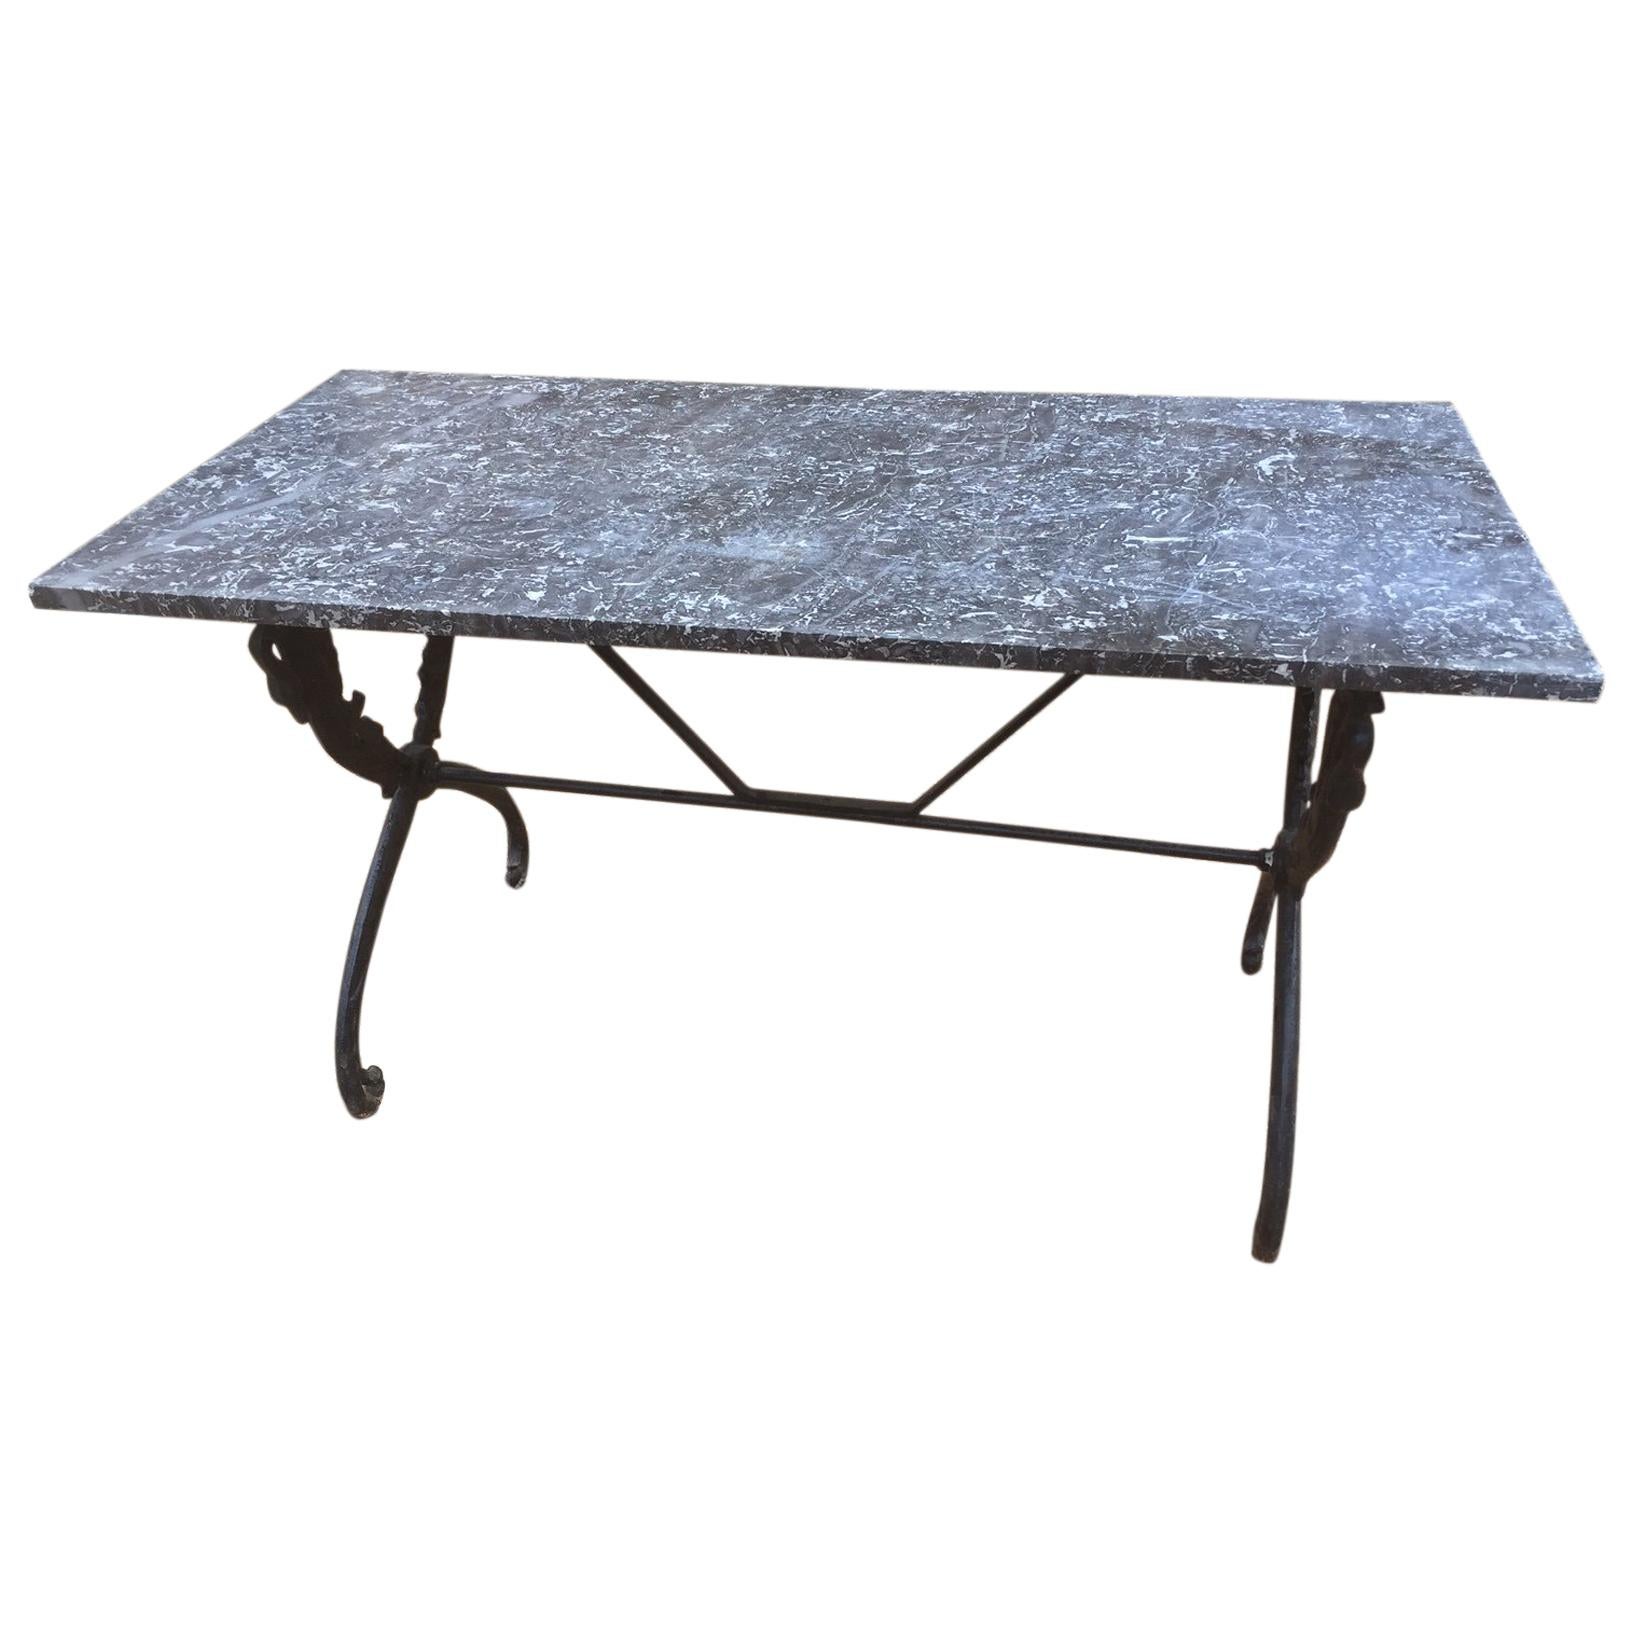 Early 19th Century, Empire Period Gooseneck Base Marble Table